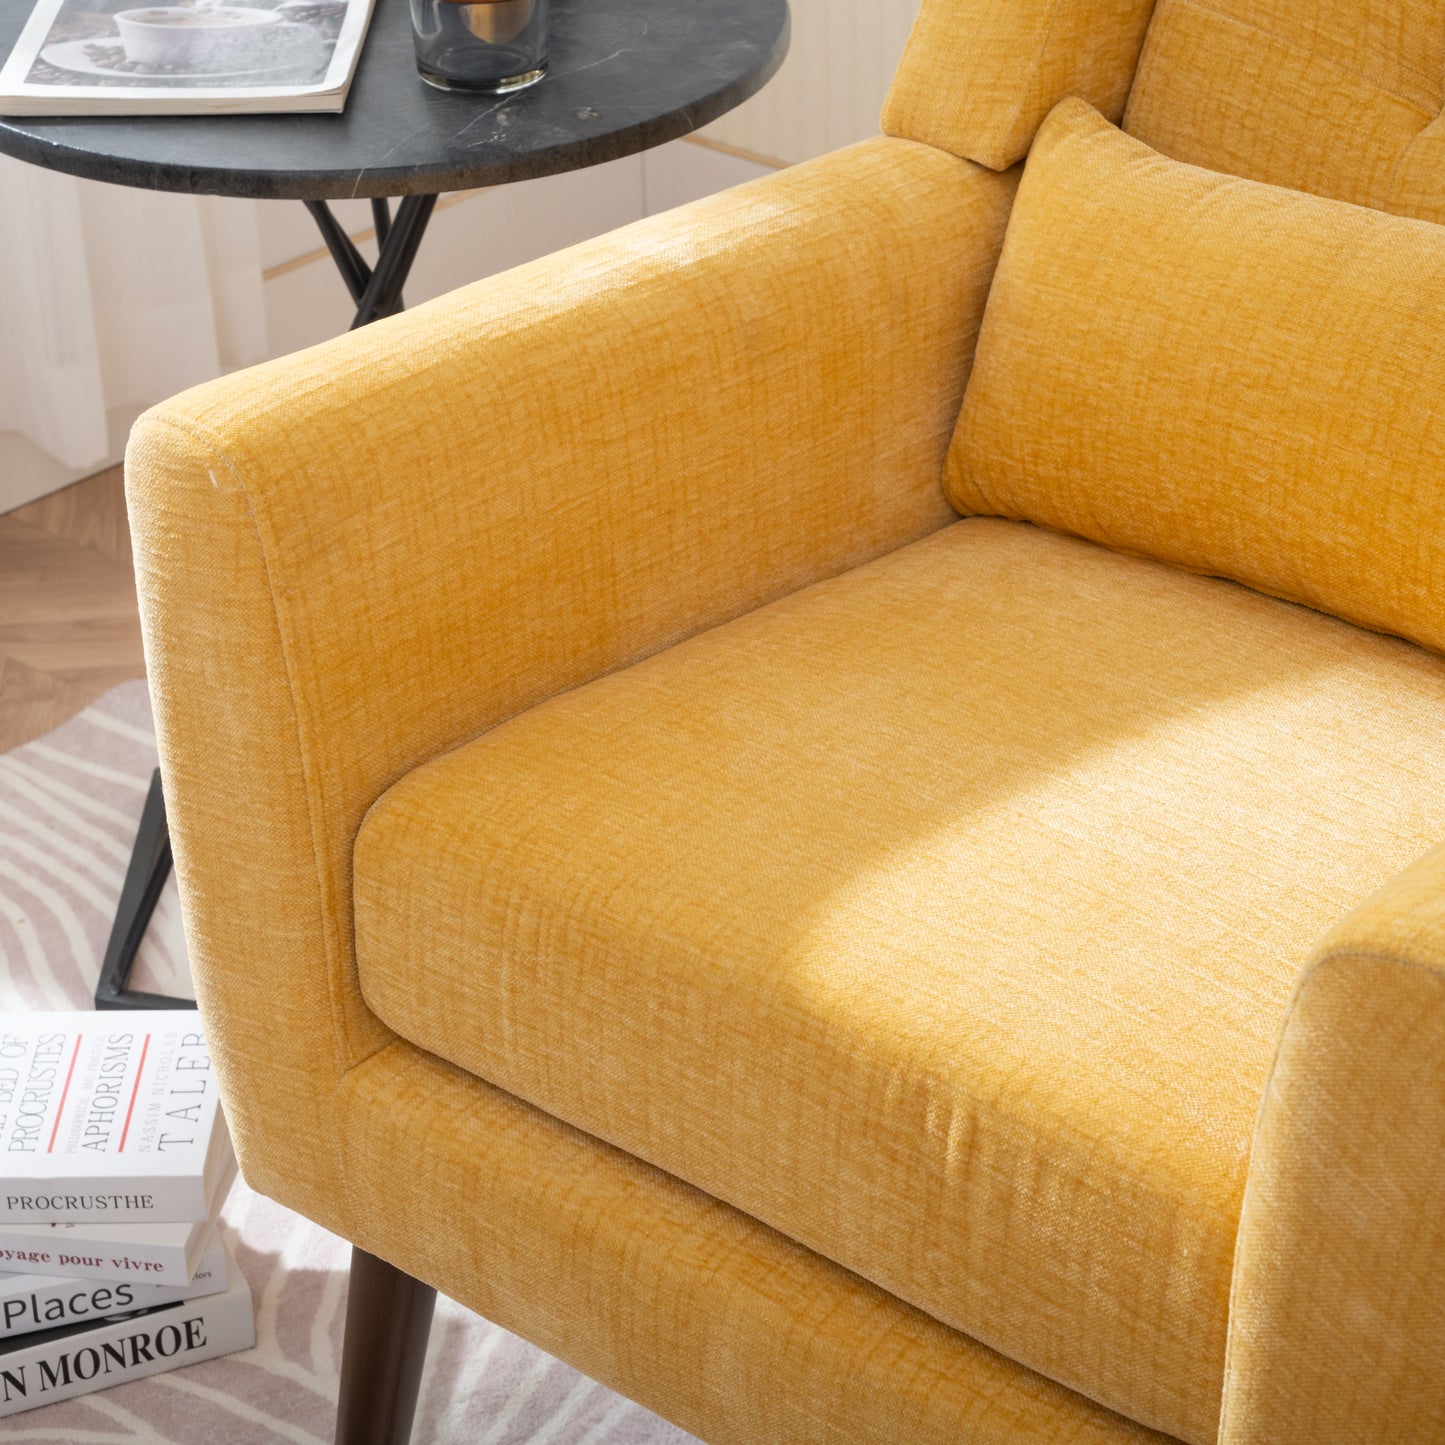 Modern Foam-Filled Accent Chair, Chenille Fabric, Lounge Armchair, Living Room, Bedroom, Yellow.